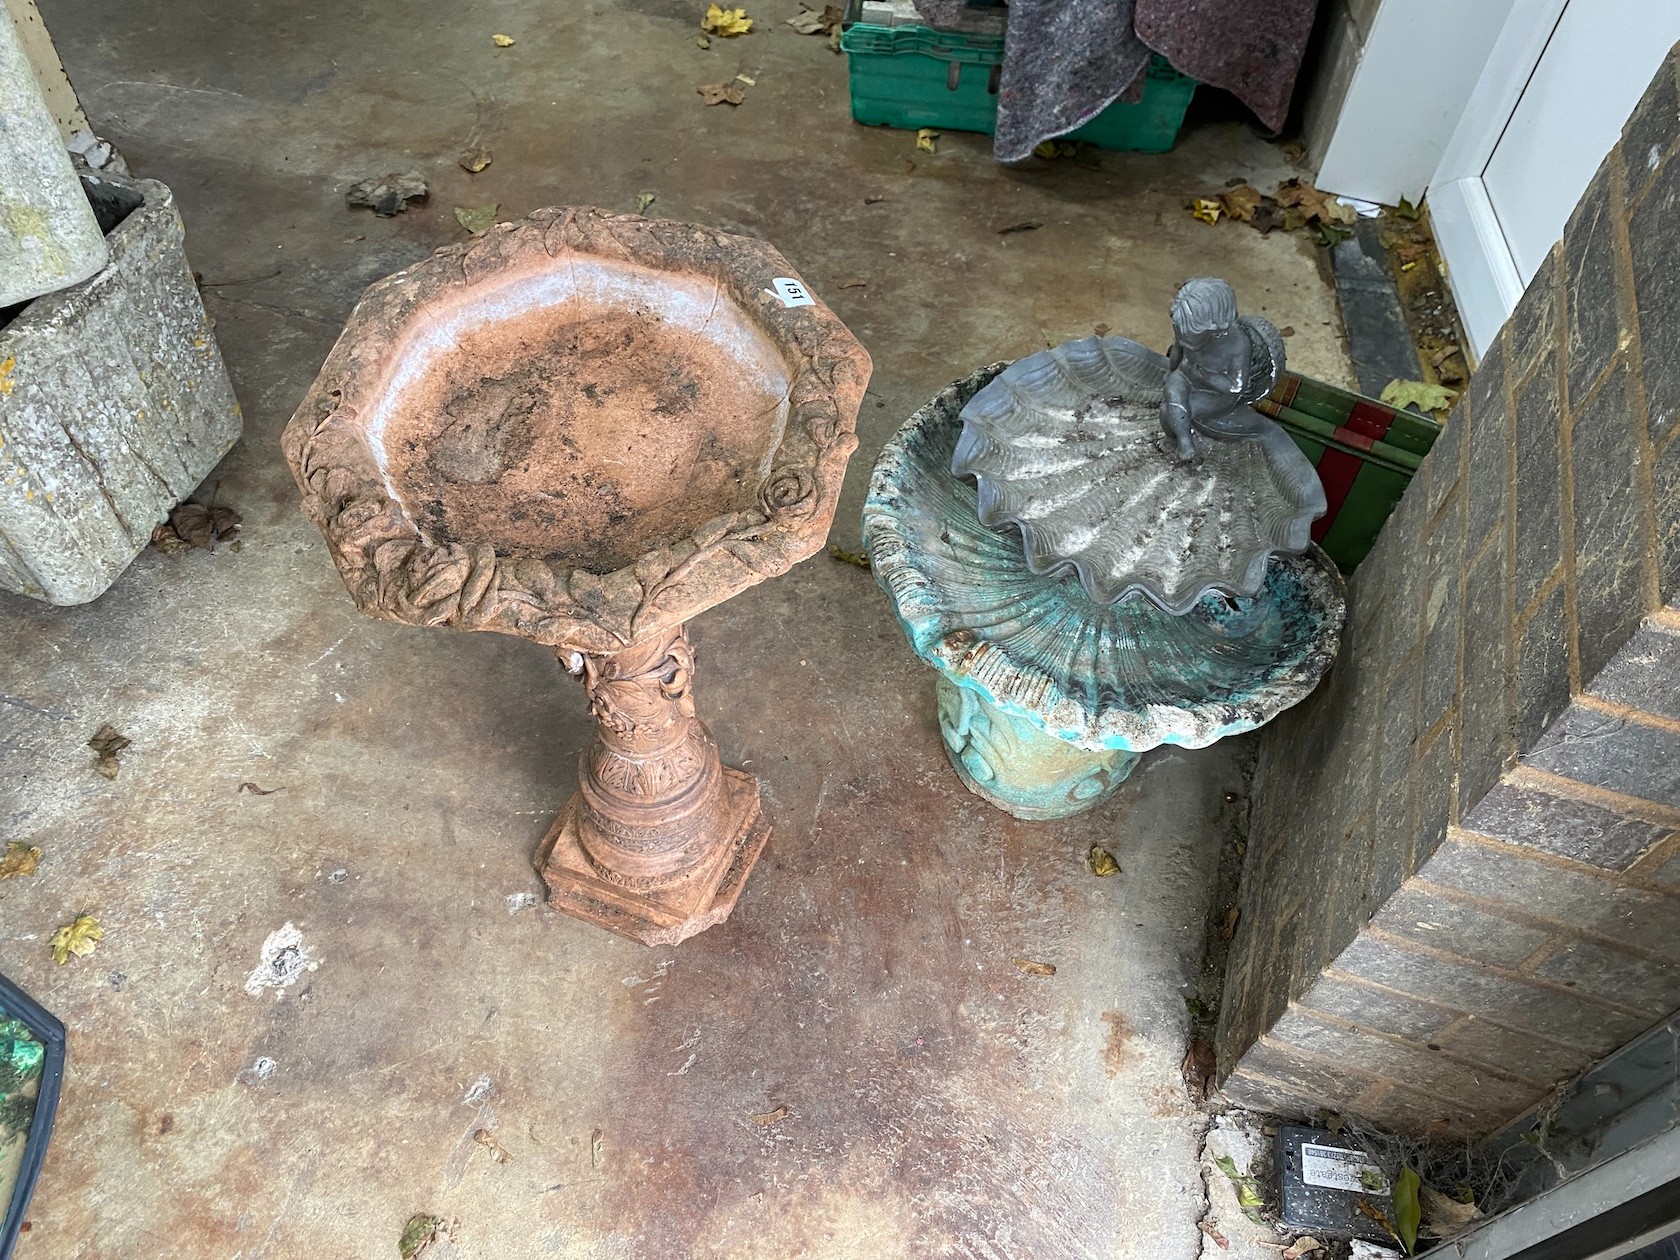 Three stone and composition bird baths, largest height 67cm and two canvas folding stools